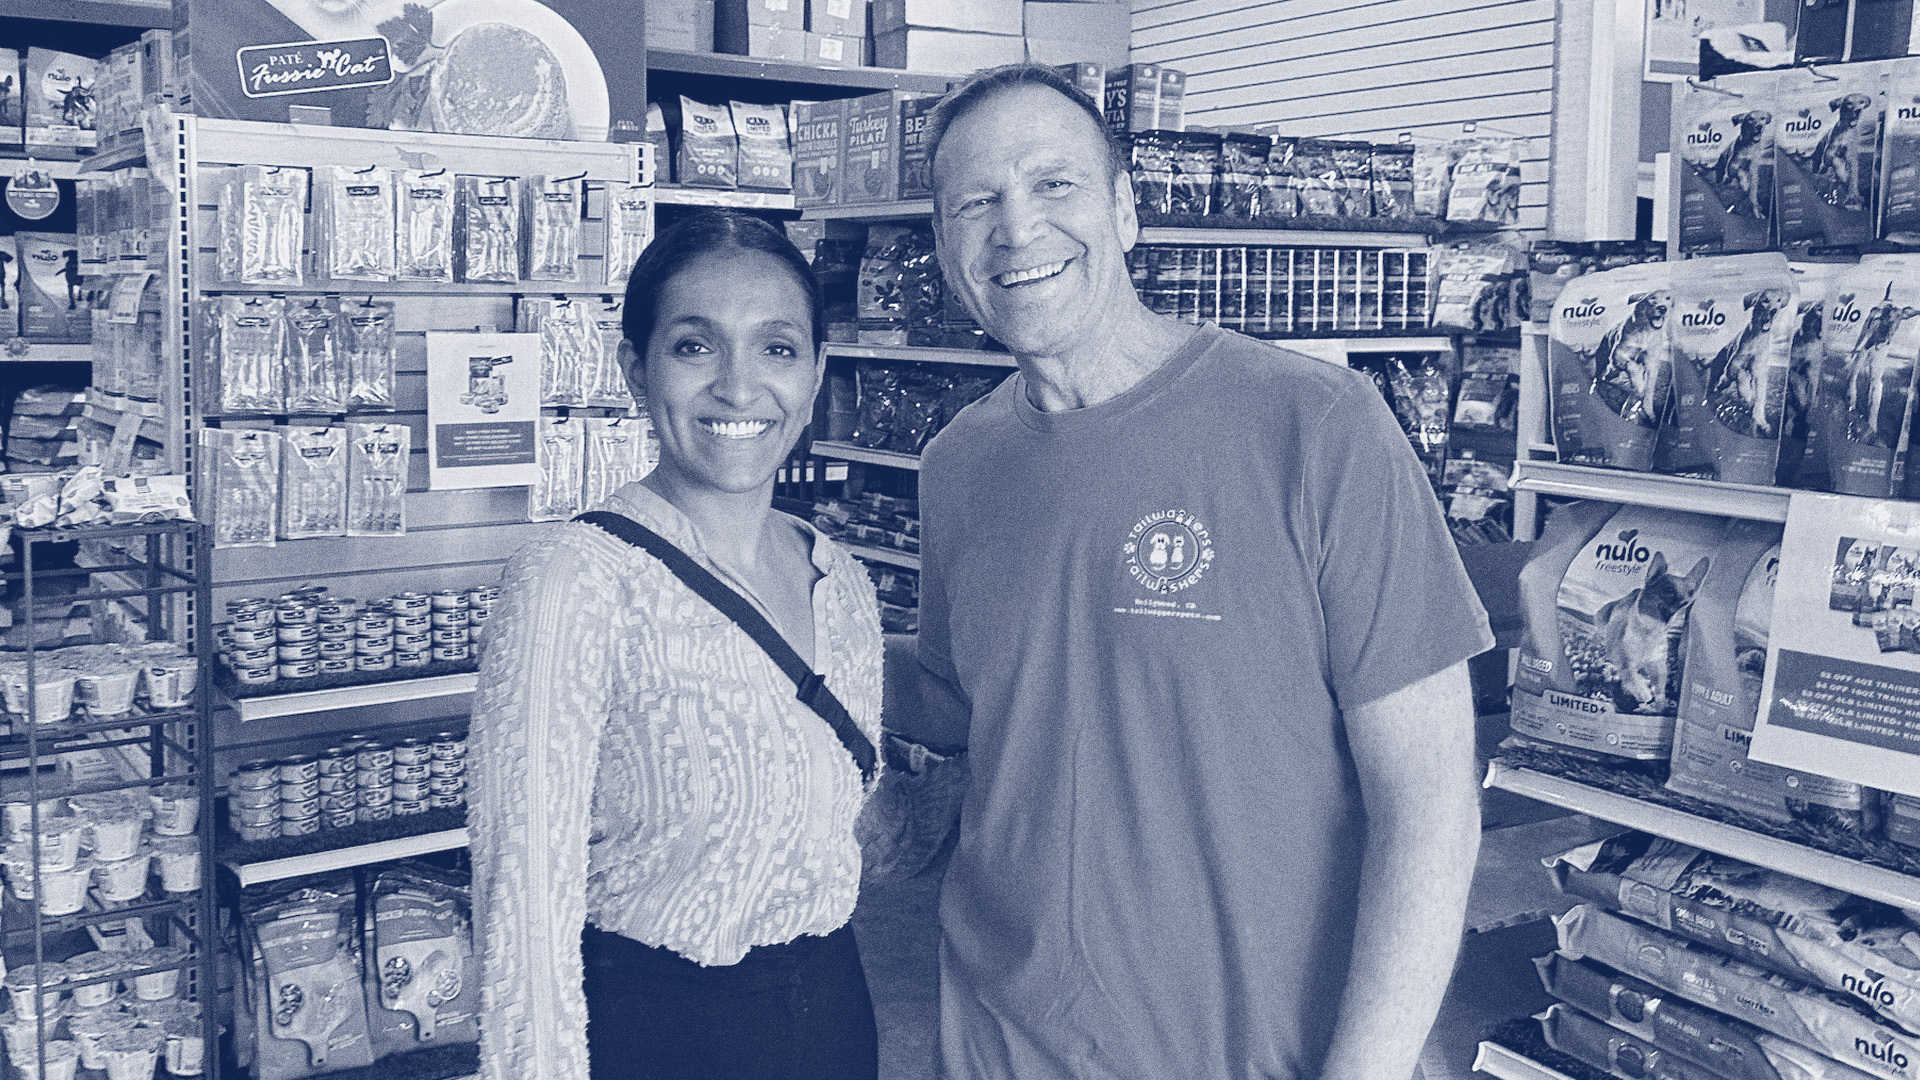 Nithya Raman with small business roman at grocery store